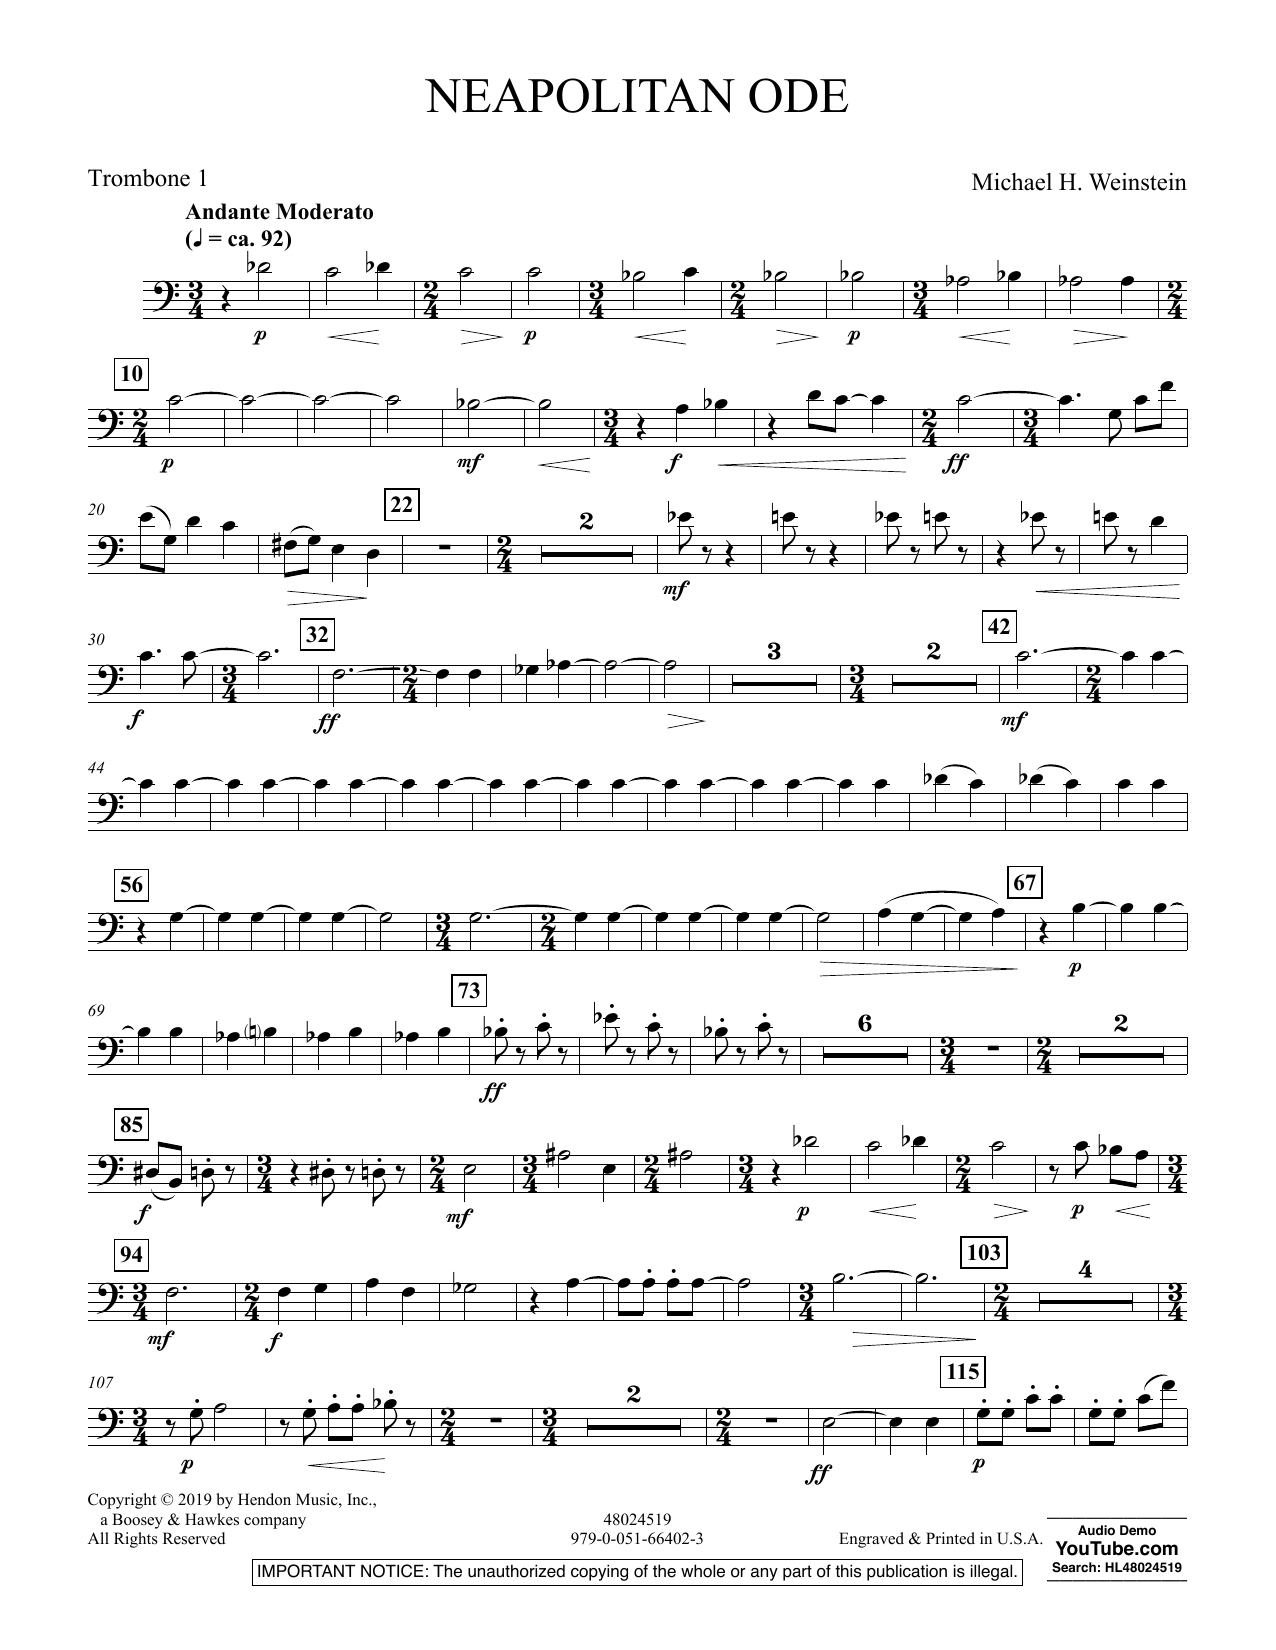 Michael H. Weinstein Neapolitan Ode - Trombone 1 sheet music preview music notes and score for Concert Band including 2 page(s)